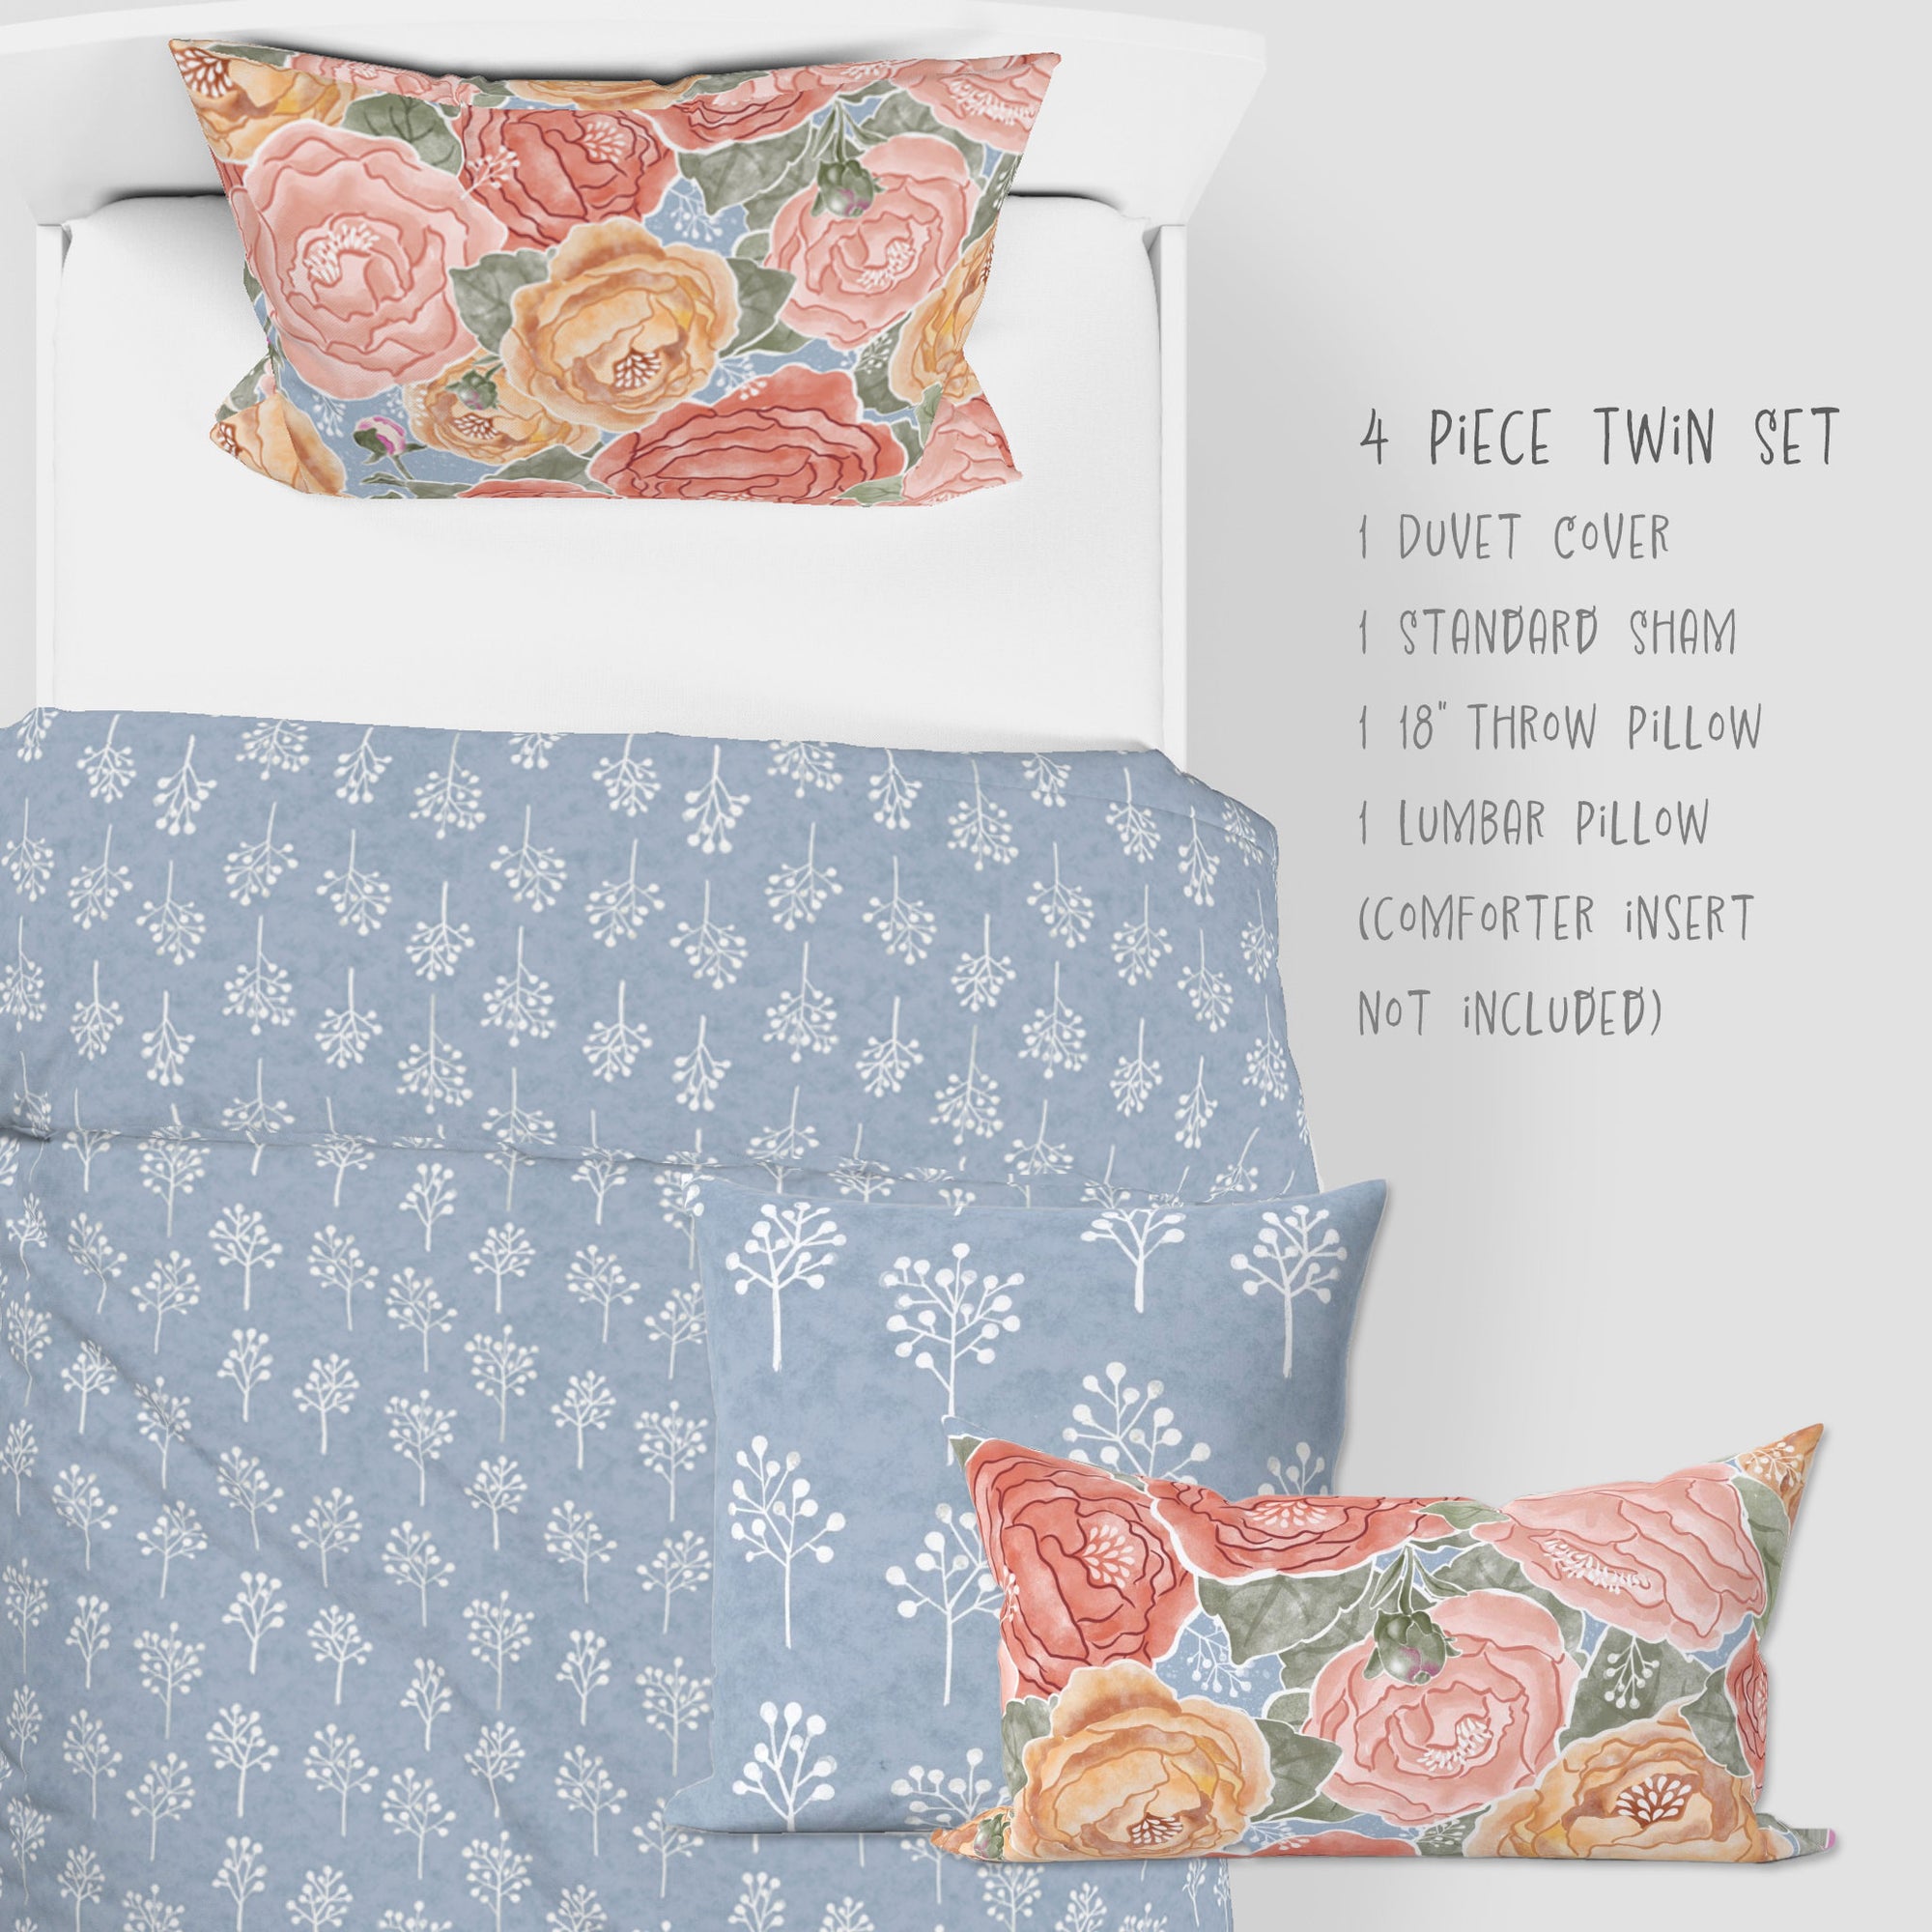 4 Piece Sets for Twin sizes - Pretty In Peony Baby’s Breath Blue comes with Duvet cover, one Sham, 1 18” Throw Pillows and 1 Lumbar Pillow